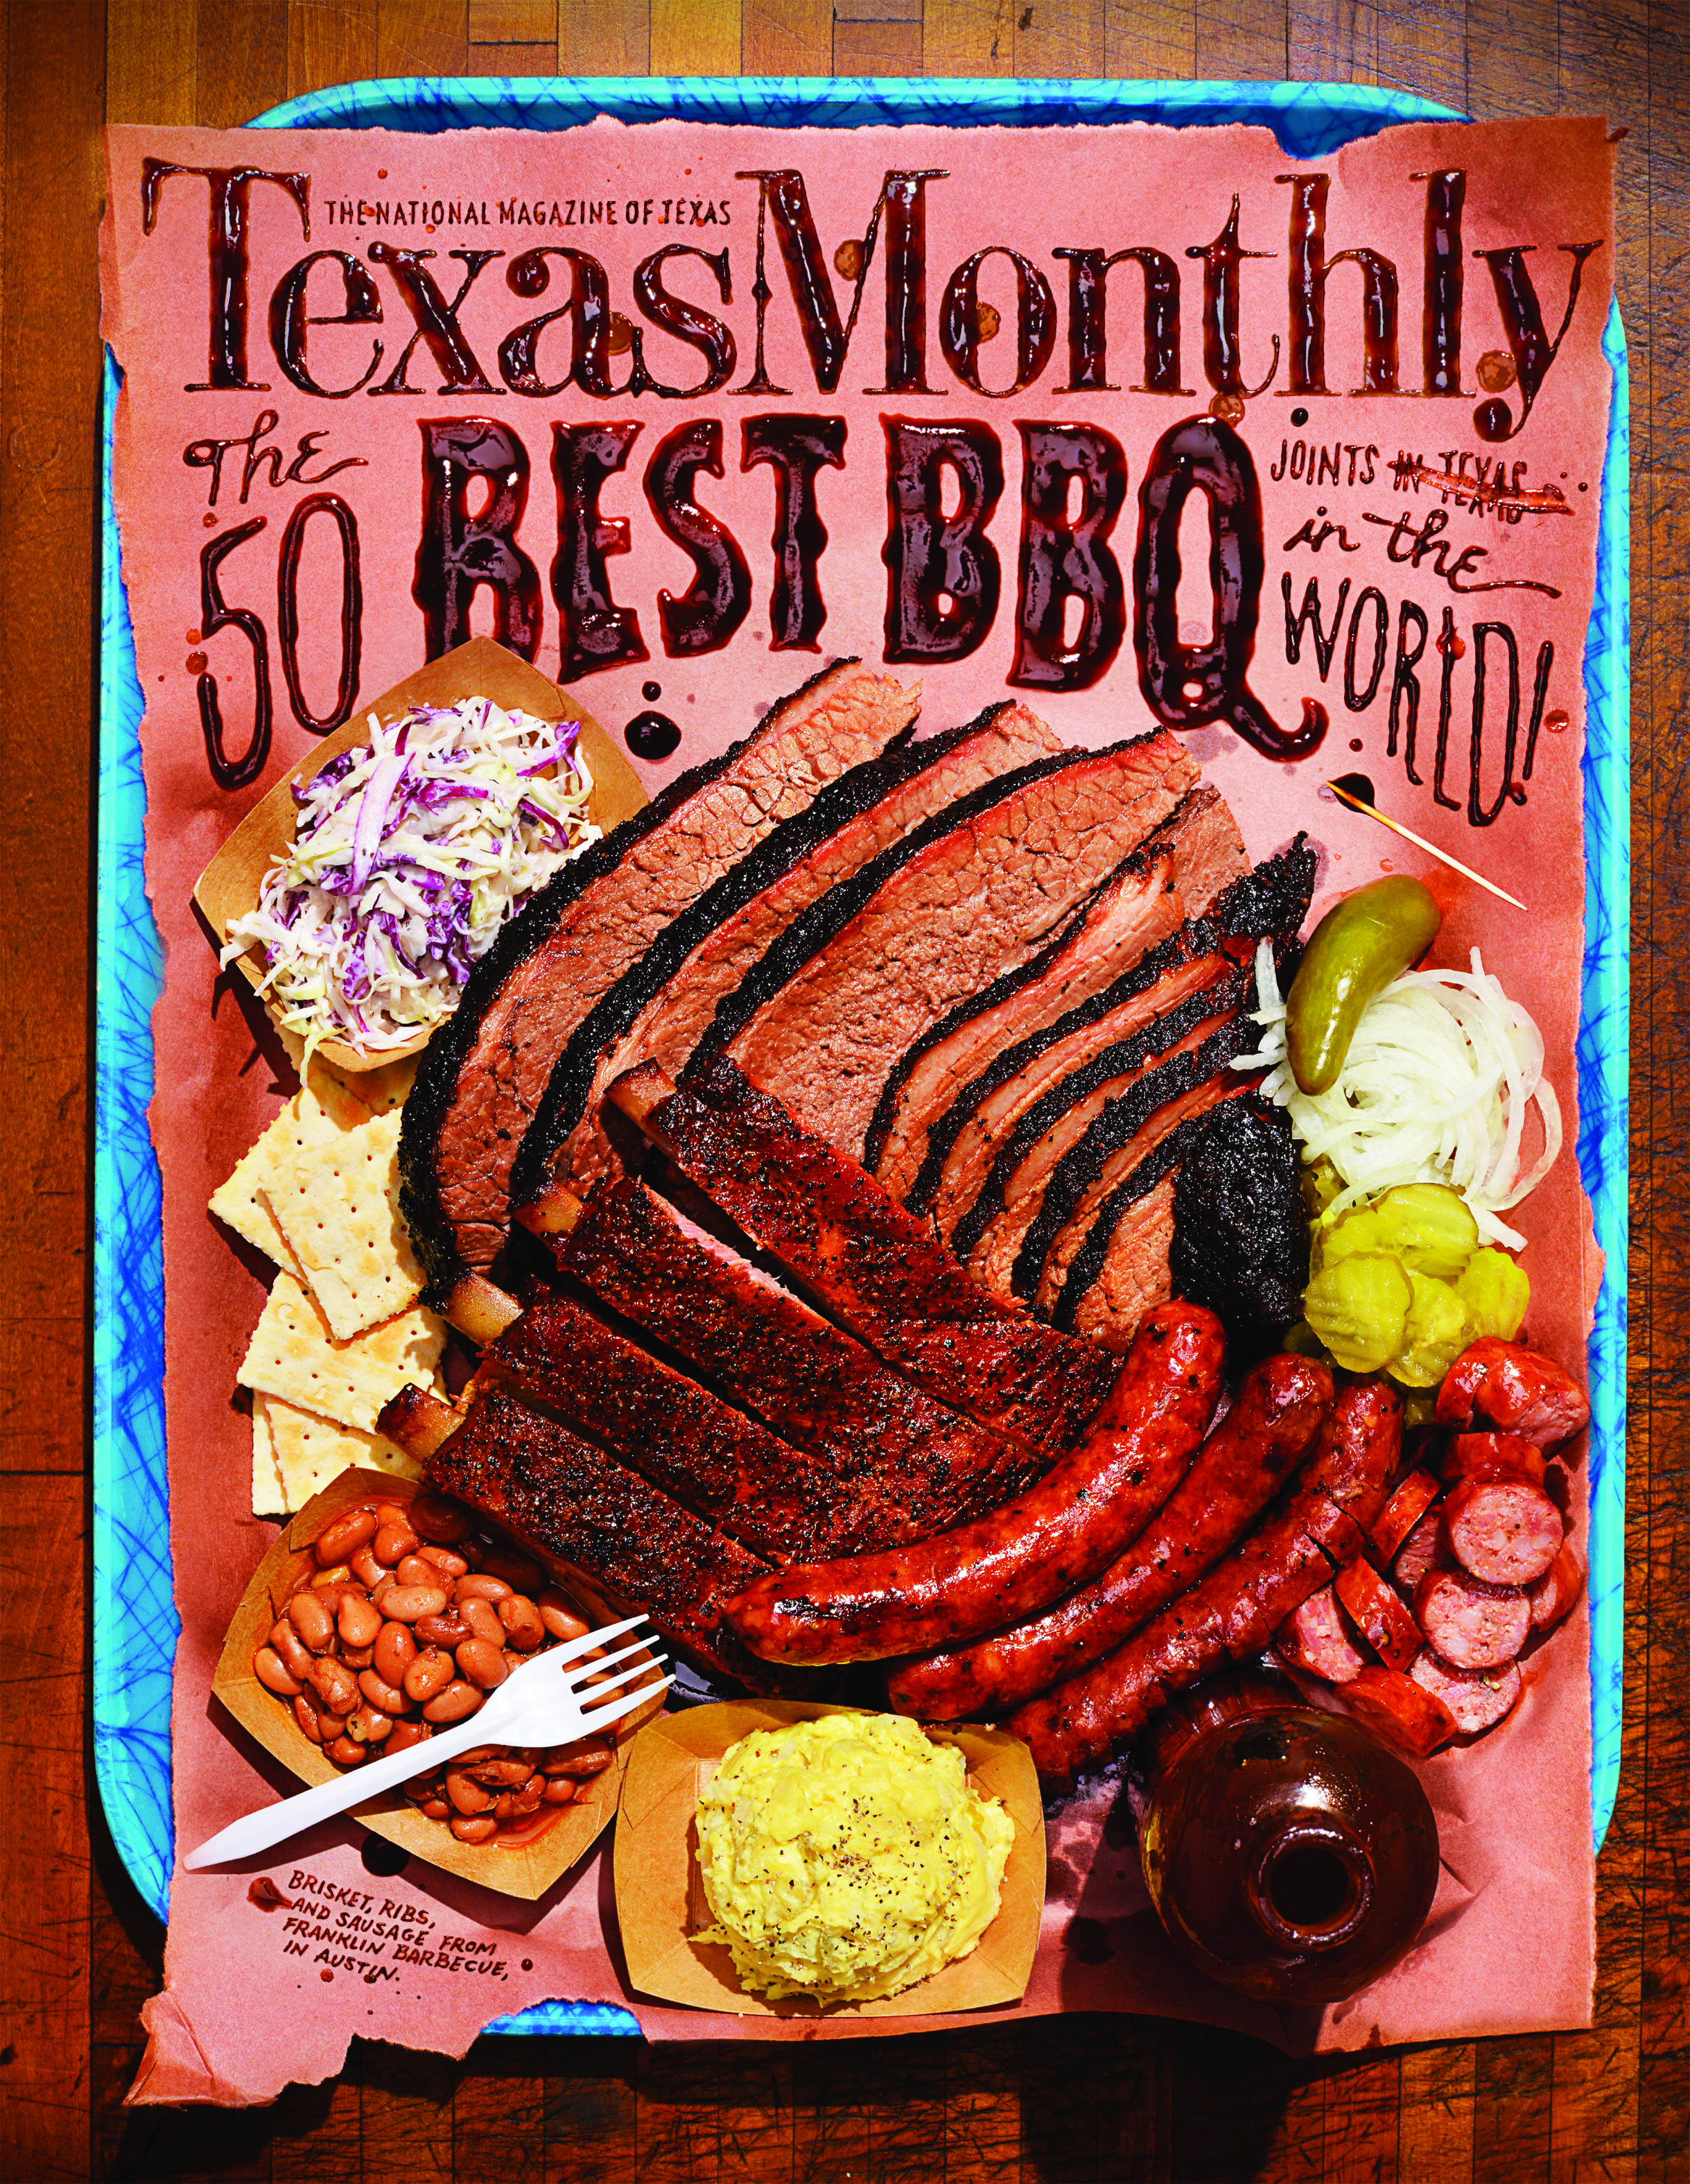 Texas Monthly-June, "The 50 Best BBQ Joints . . . in the World!"